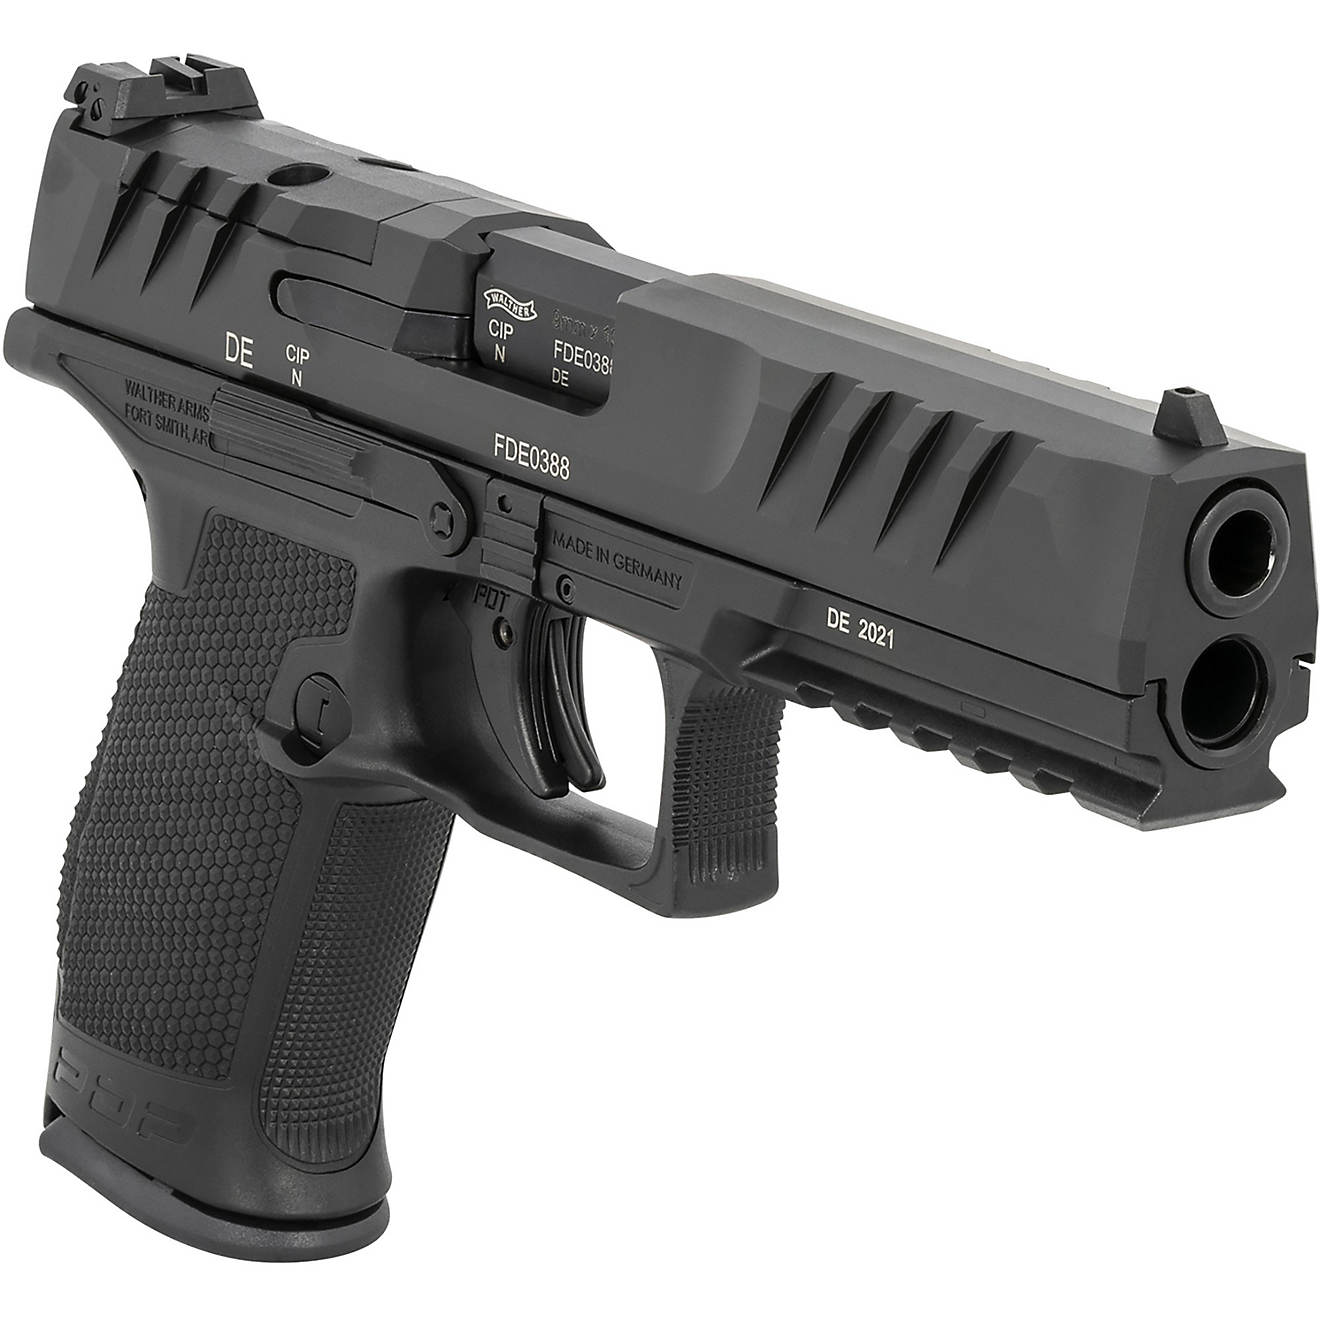 walther-pdp-compact-optic-ready-9mm-luger-pistol-academy